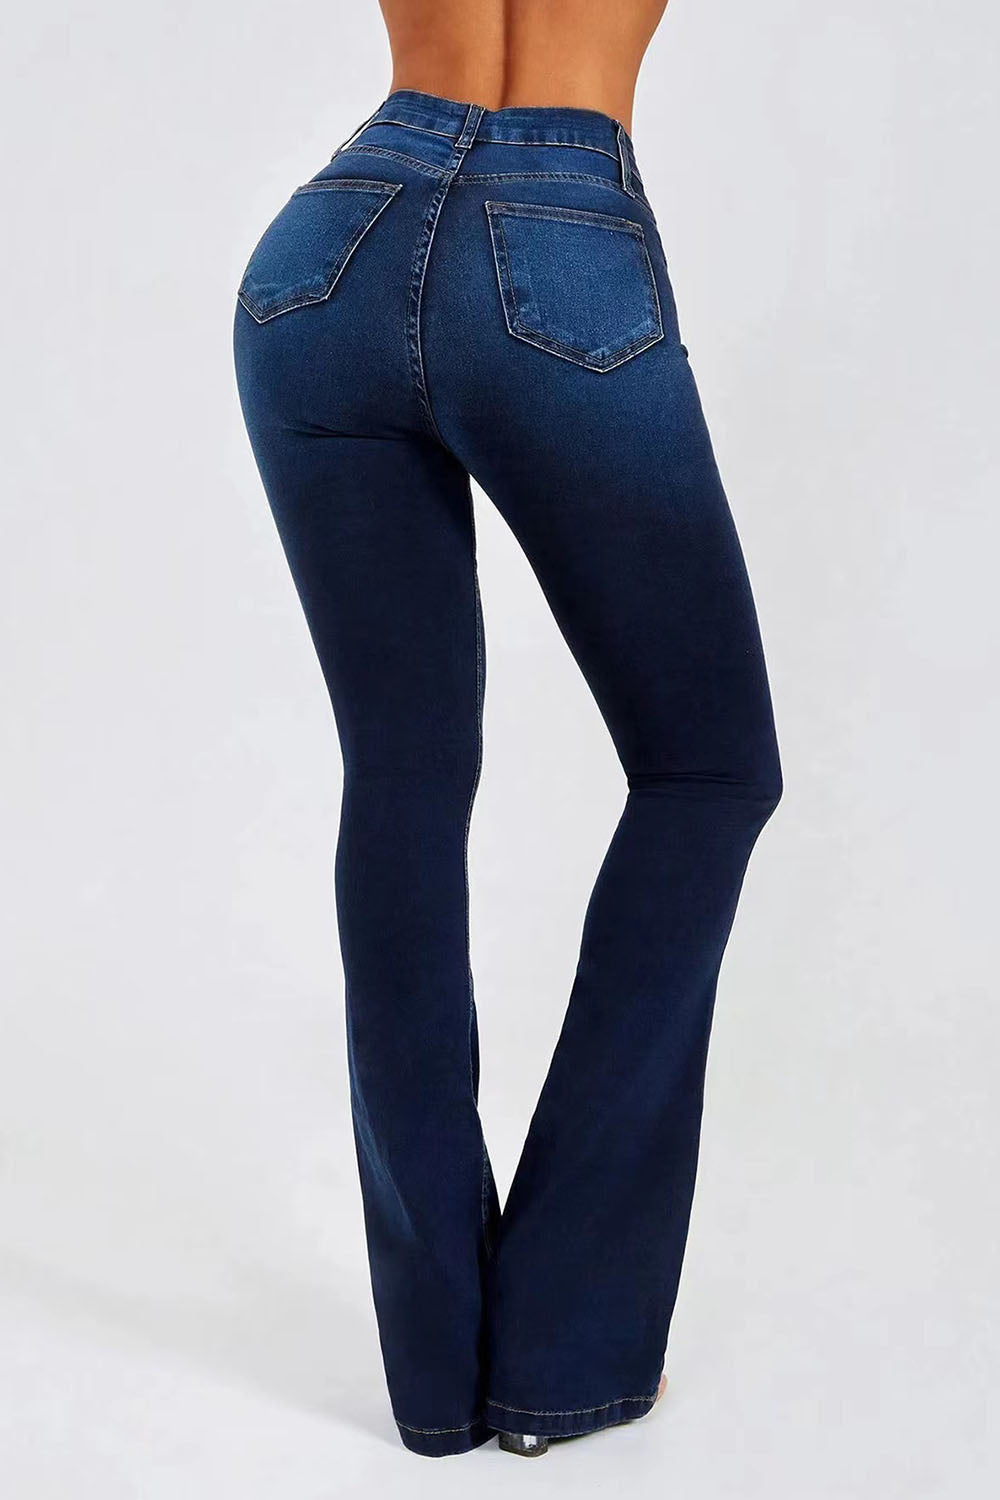 Flared Bottom Tight Fit Jeans